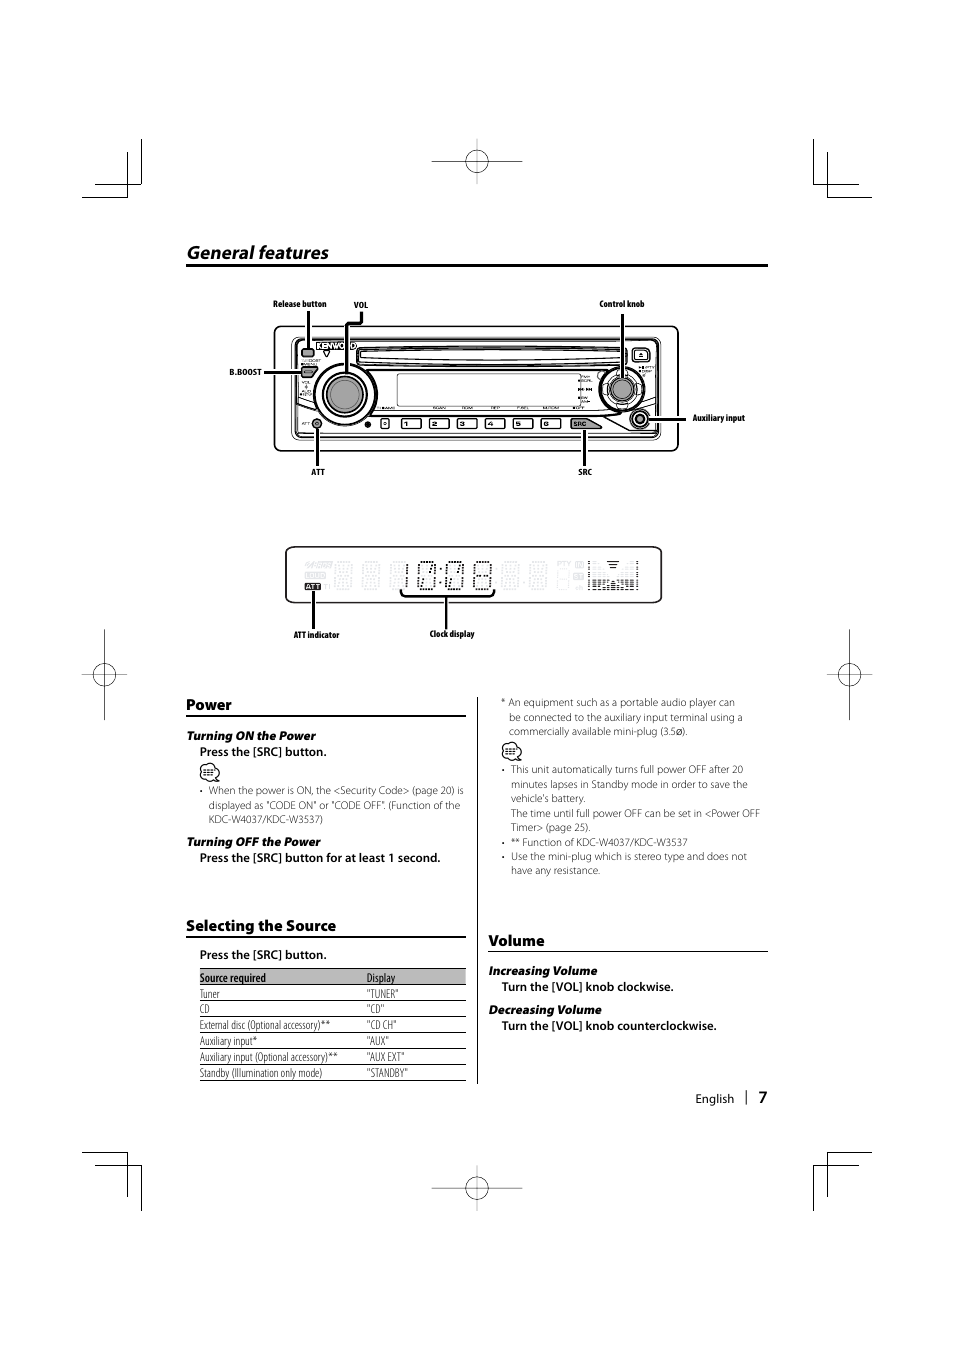 General features, Power, Selecting the source | Kenwood KDC-W4037 User  Manual | Page 7 / 36 | Original mode